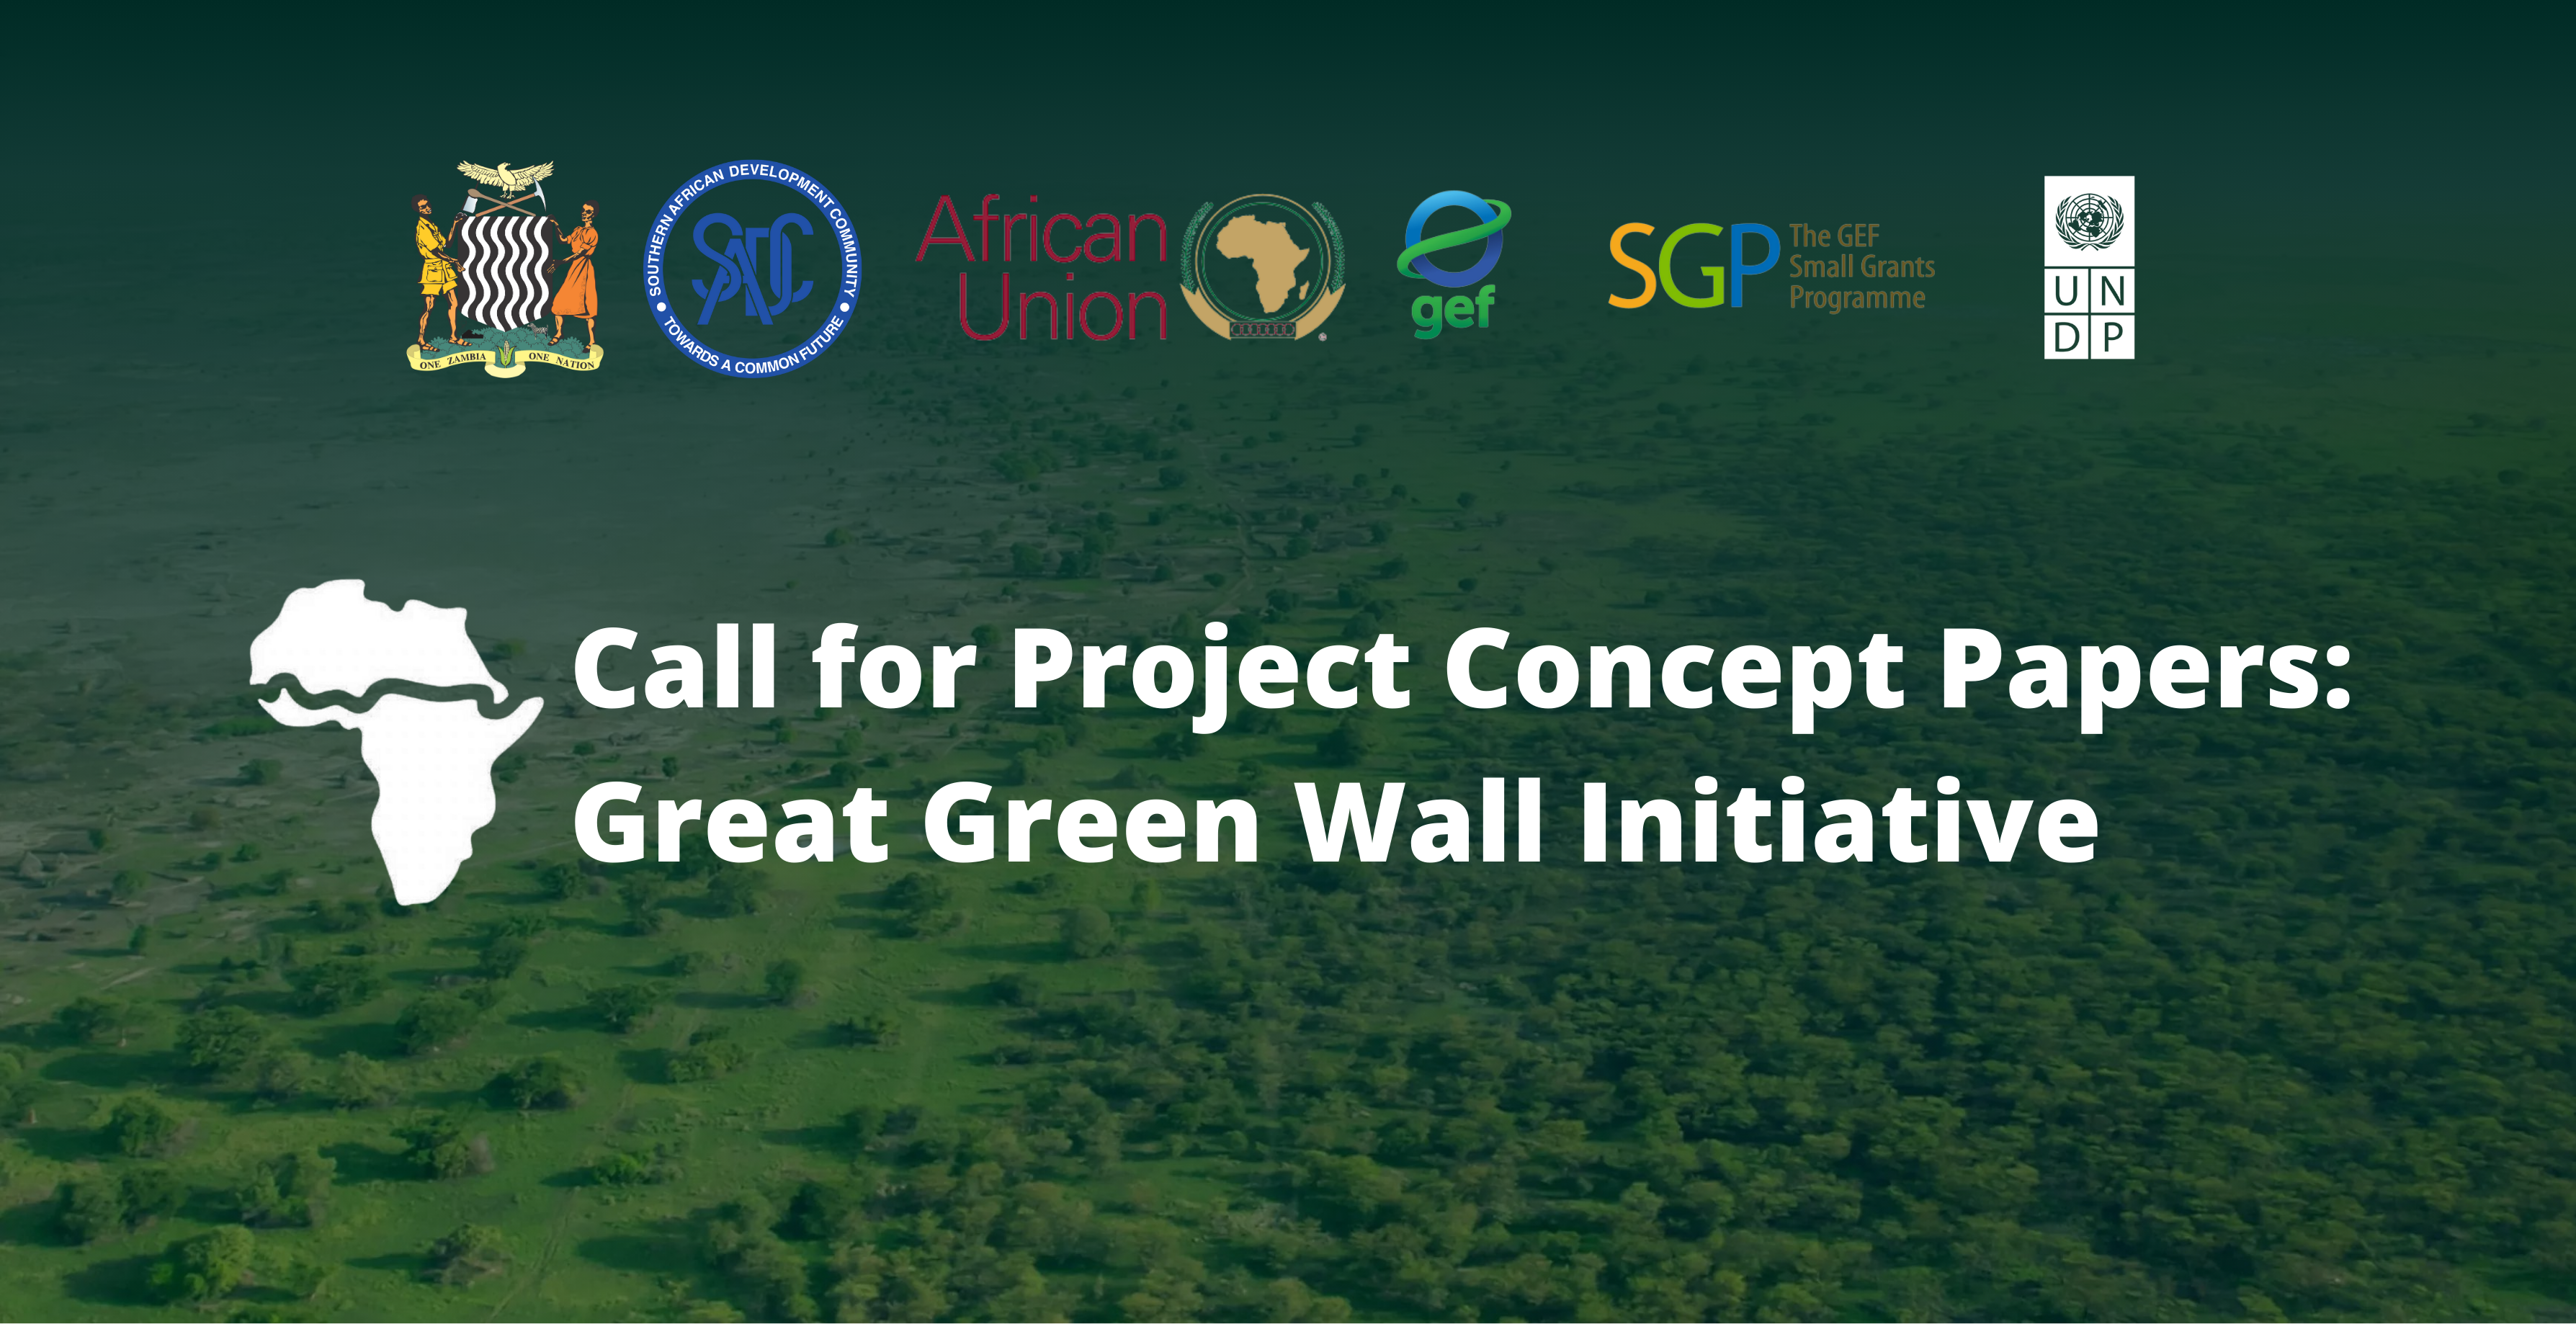 An image of an open field with text that reads "Call for Project Concept Papers: Great Green Wall Initiative 2023" and logos of the Government of Zambia, SADC, the African Union, the Global Environment Facility, the Small Grants Programme and the UNDP